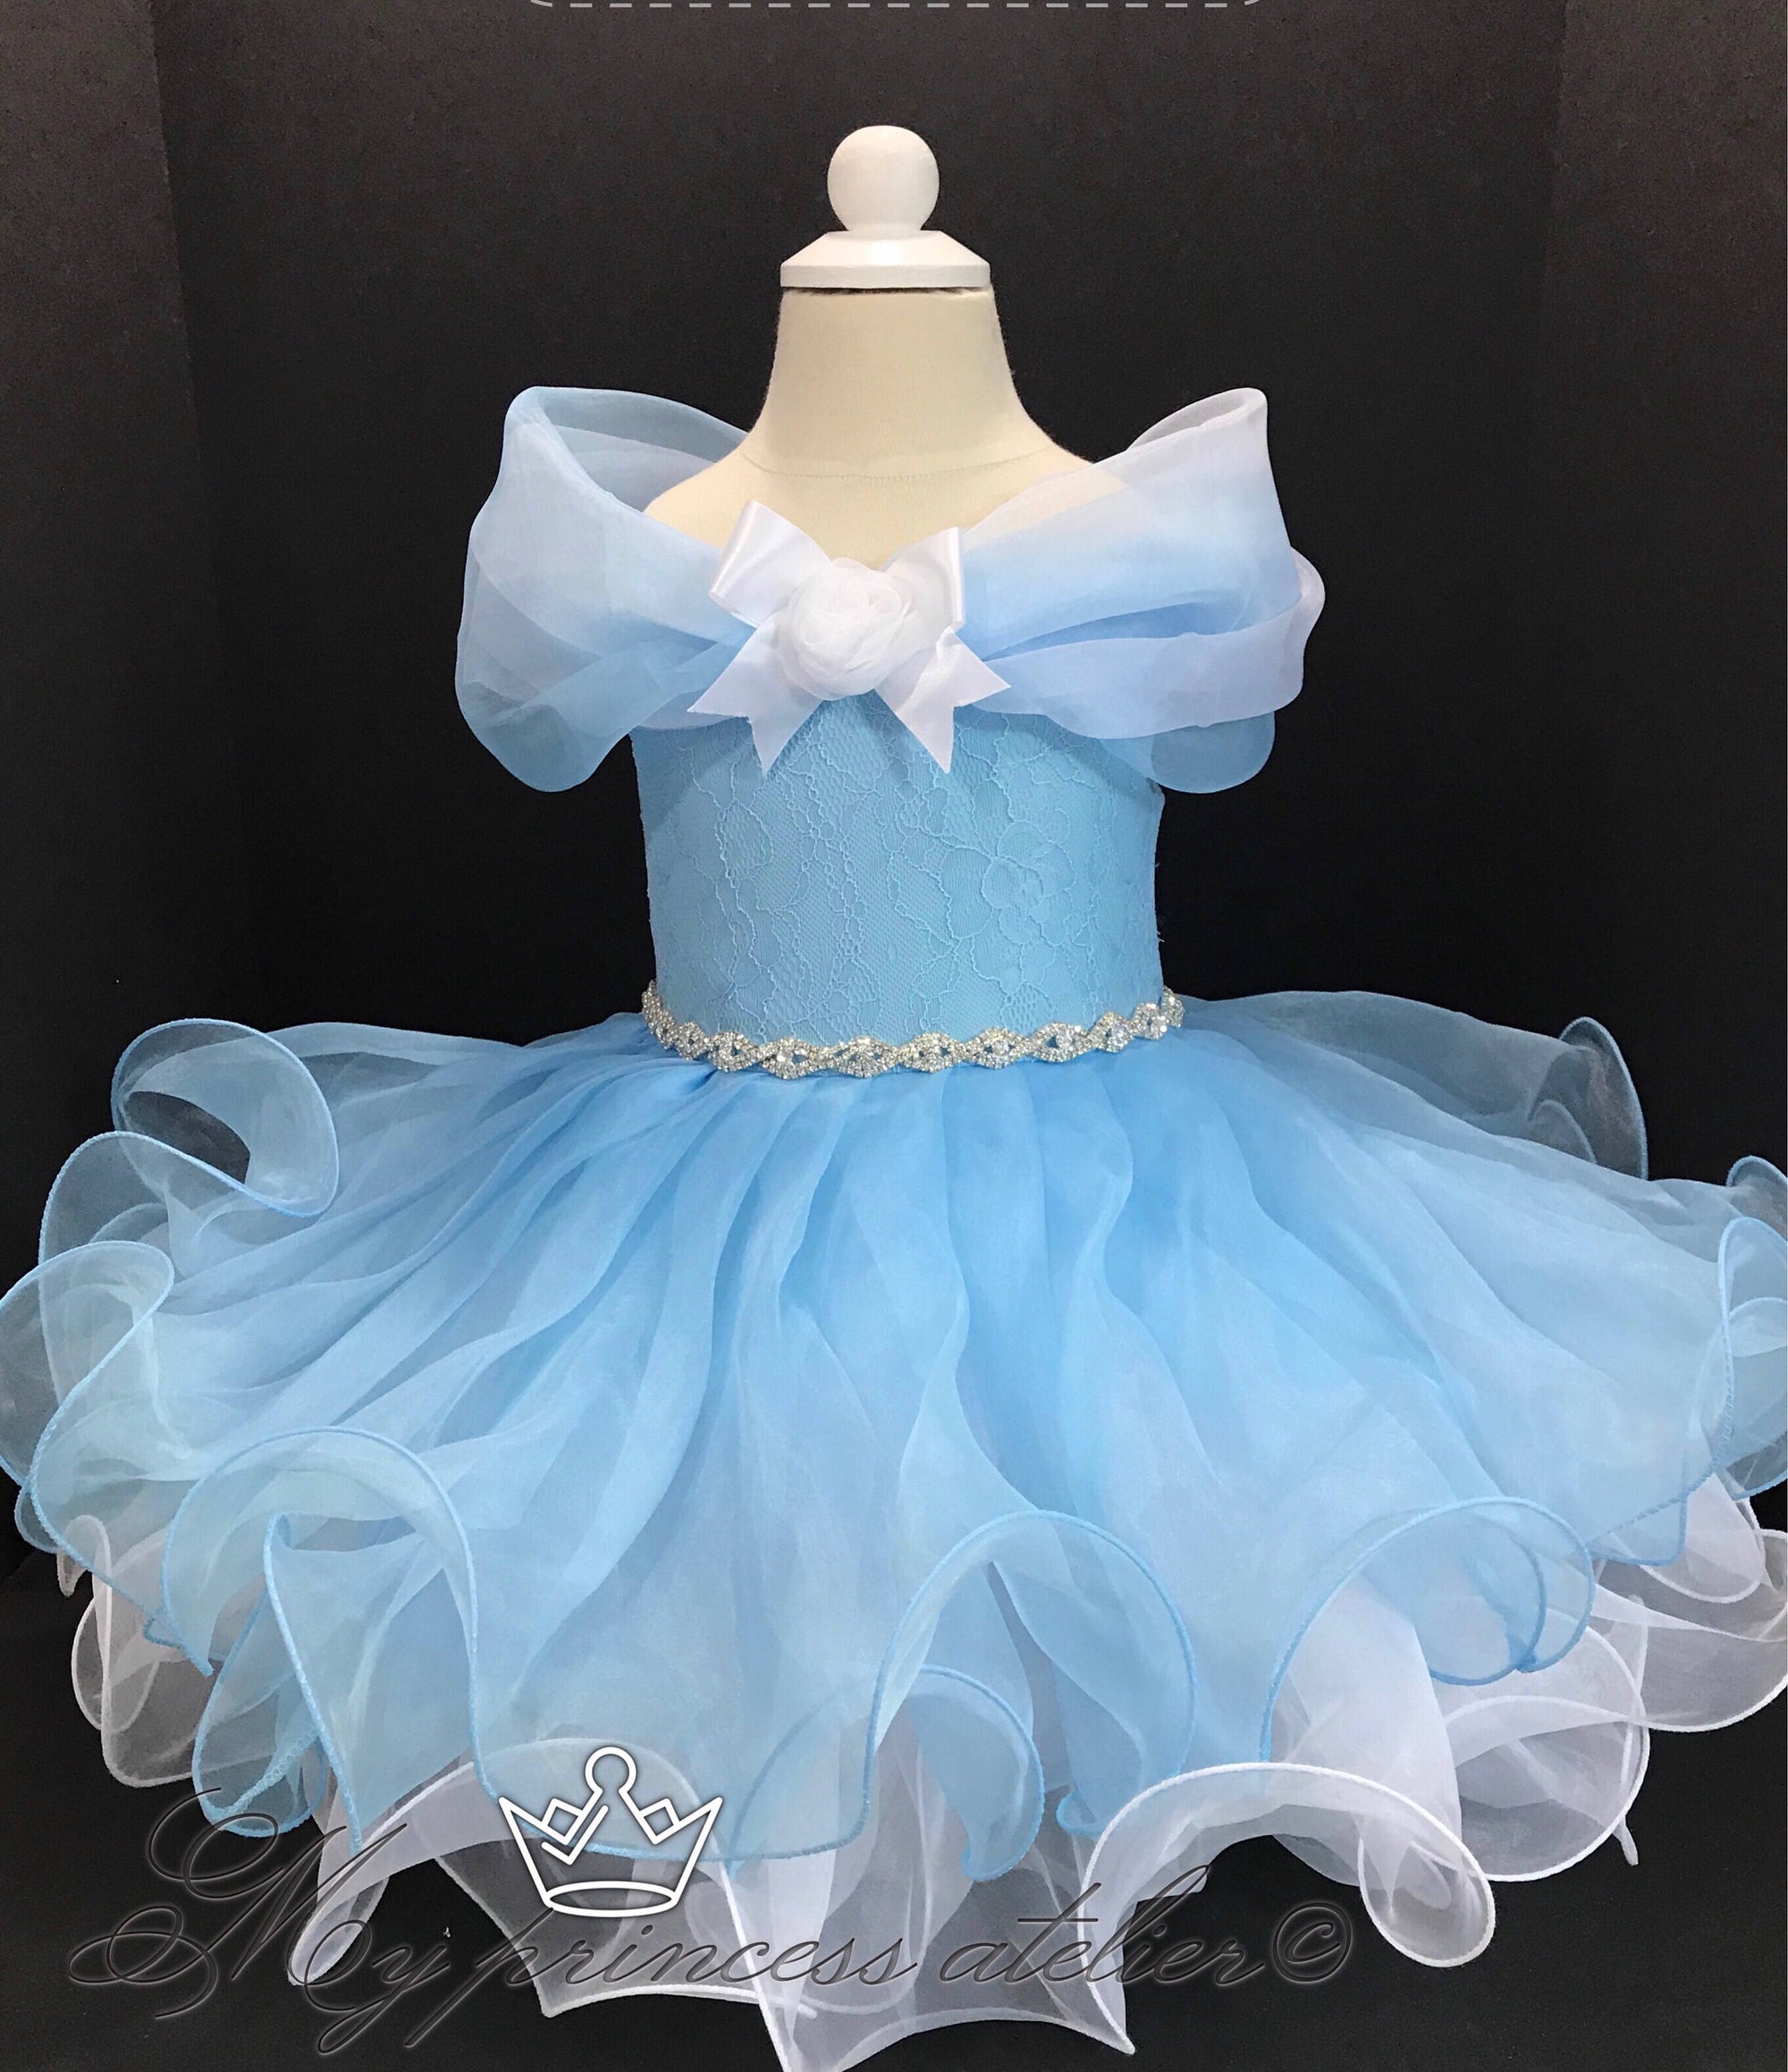  Baby girl princess birthday outfit First birthday